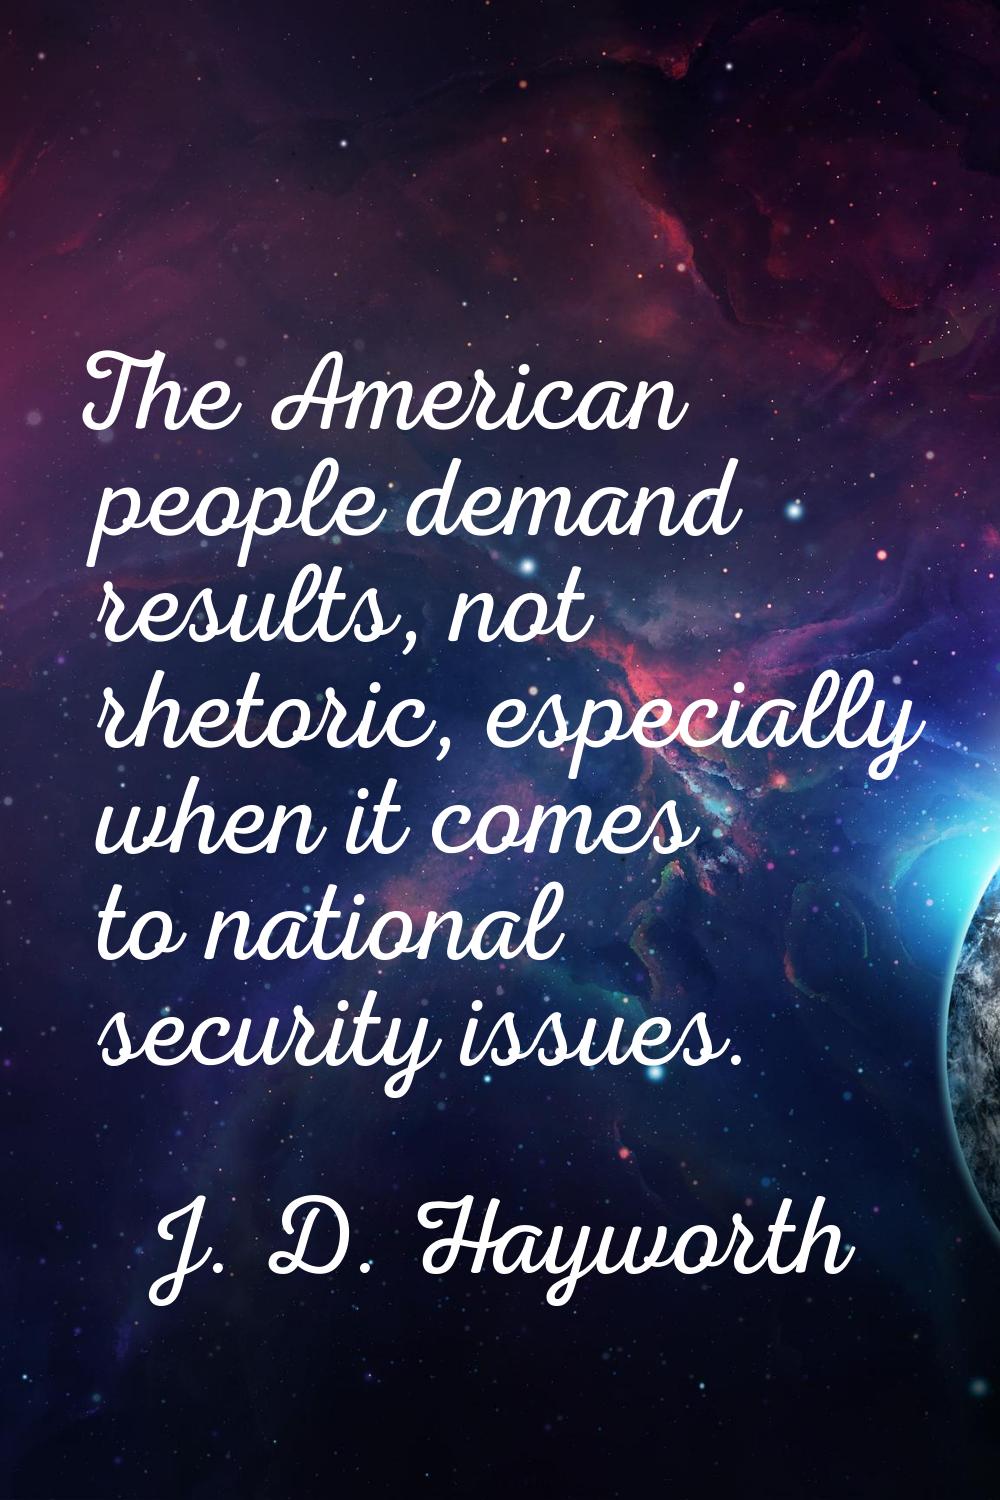 The American people demand results, not rhetoric, especially when it comes to national security iss